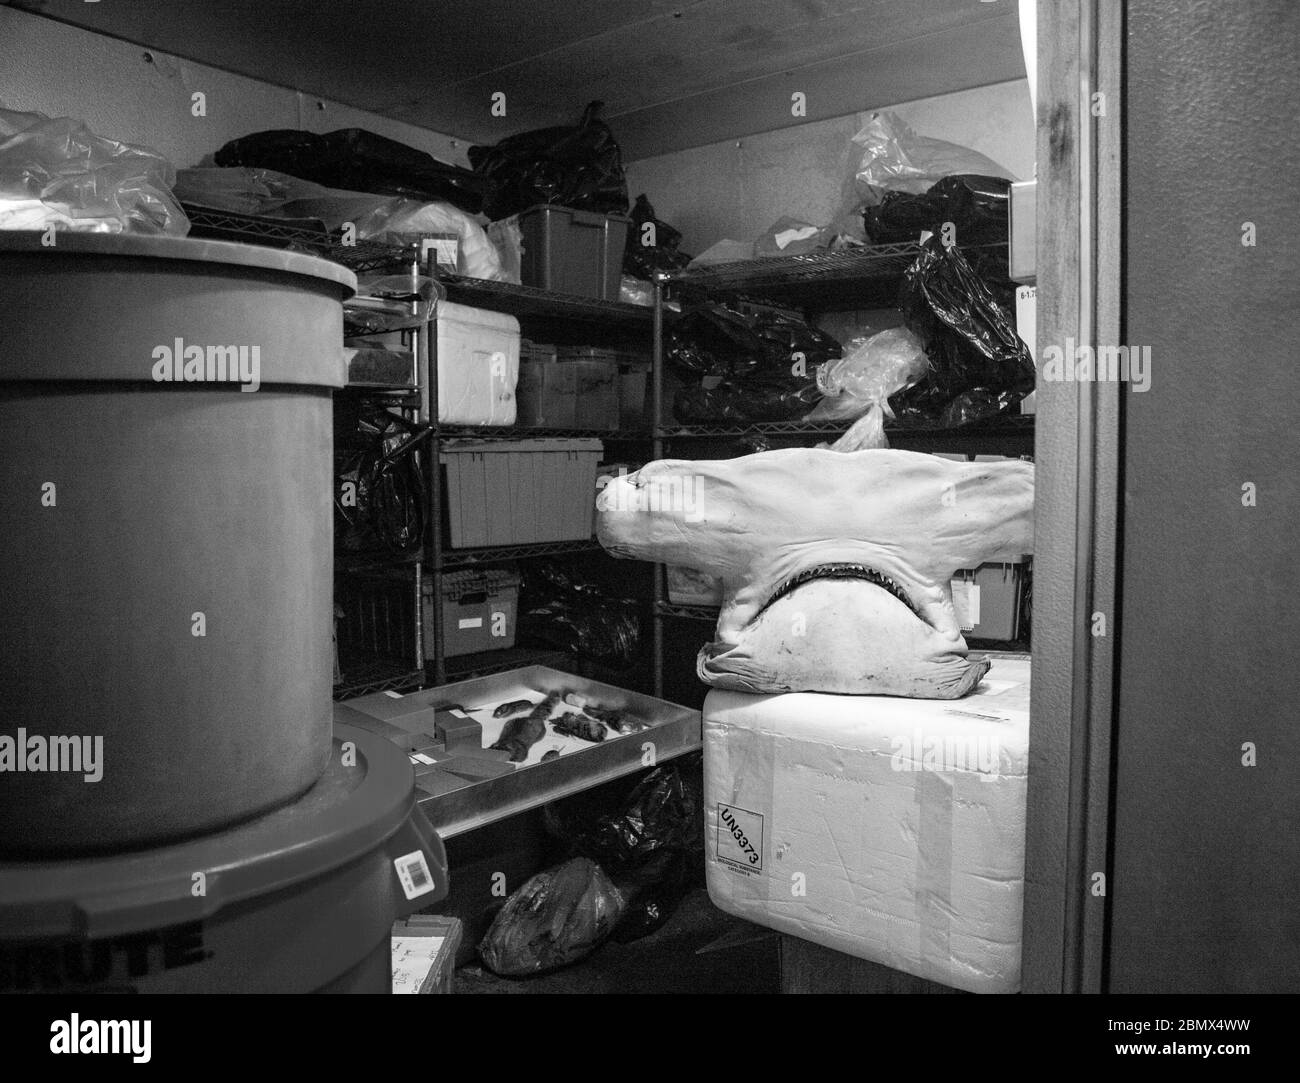 The head of a hammerhead shark sits in a cold room along with bags of other specimens in the collections of Cornell's Museum of Vertebrates (CUMV). Stock Photo